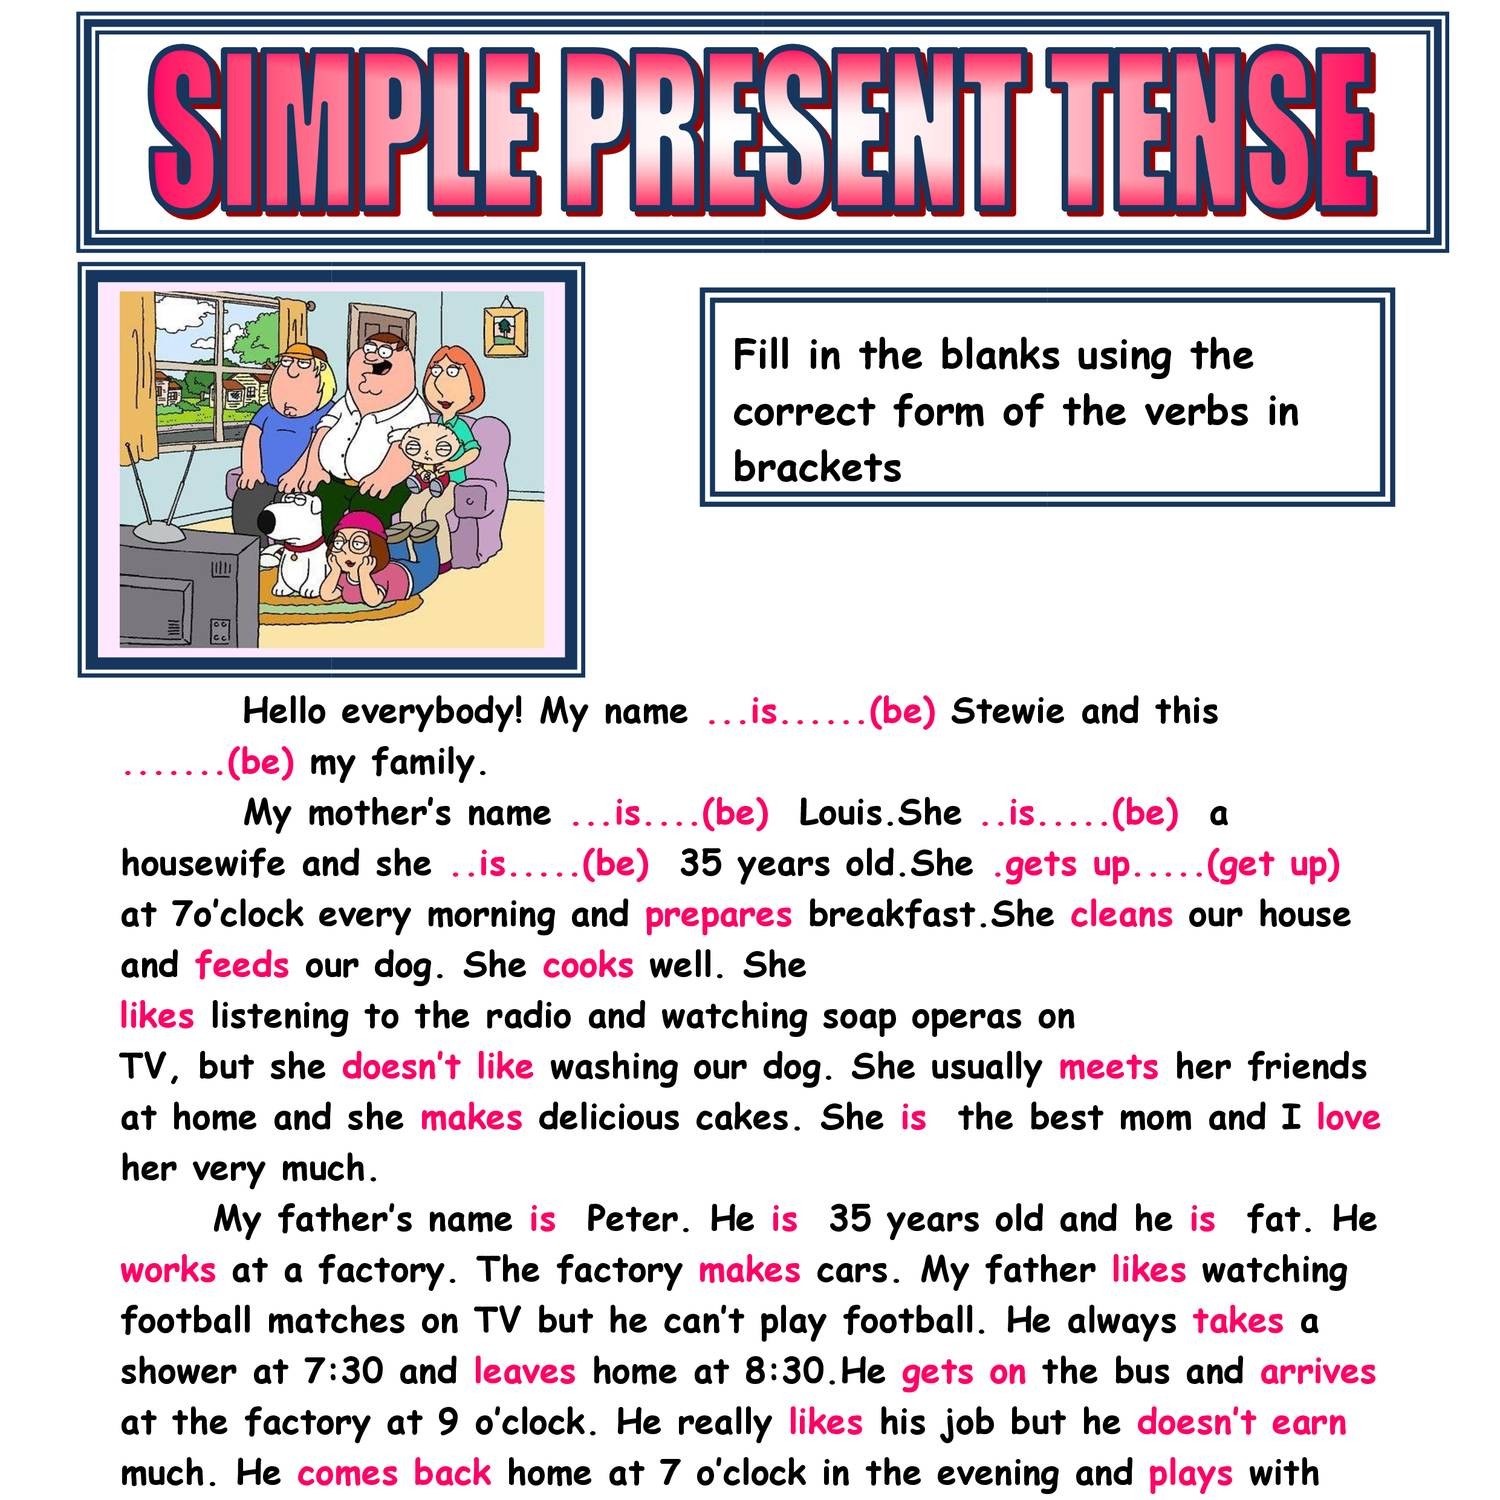 Simple Present Tense Answers docx DocDroid